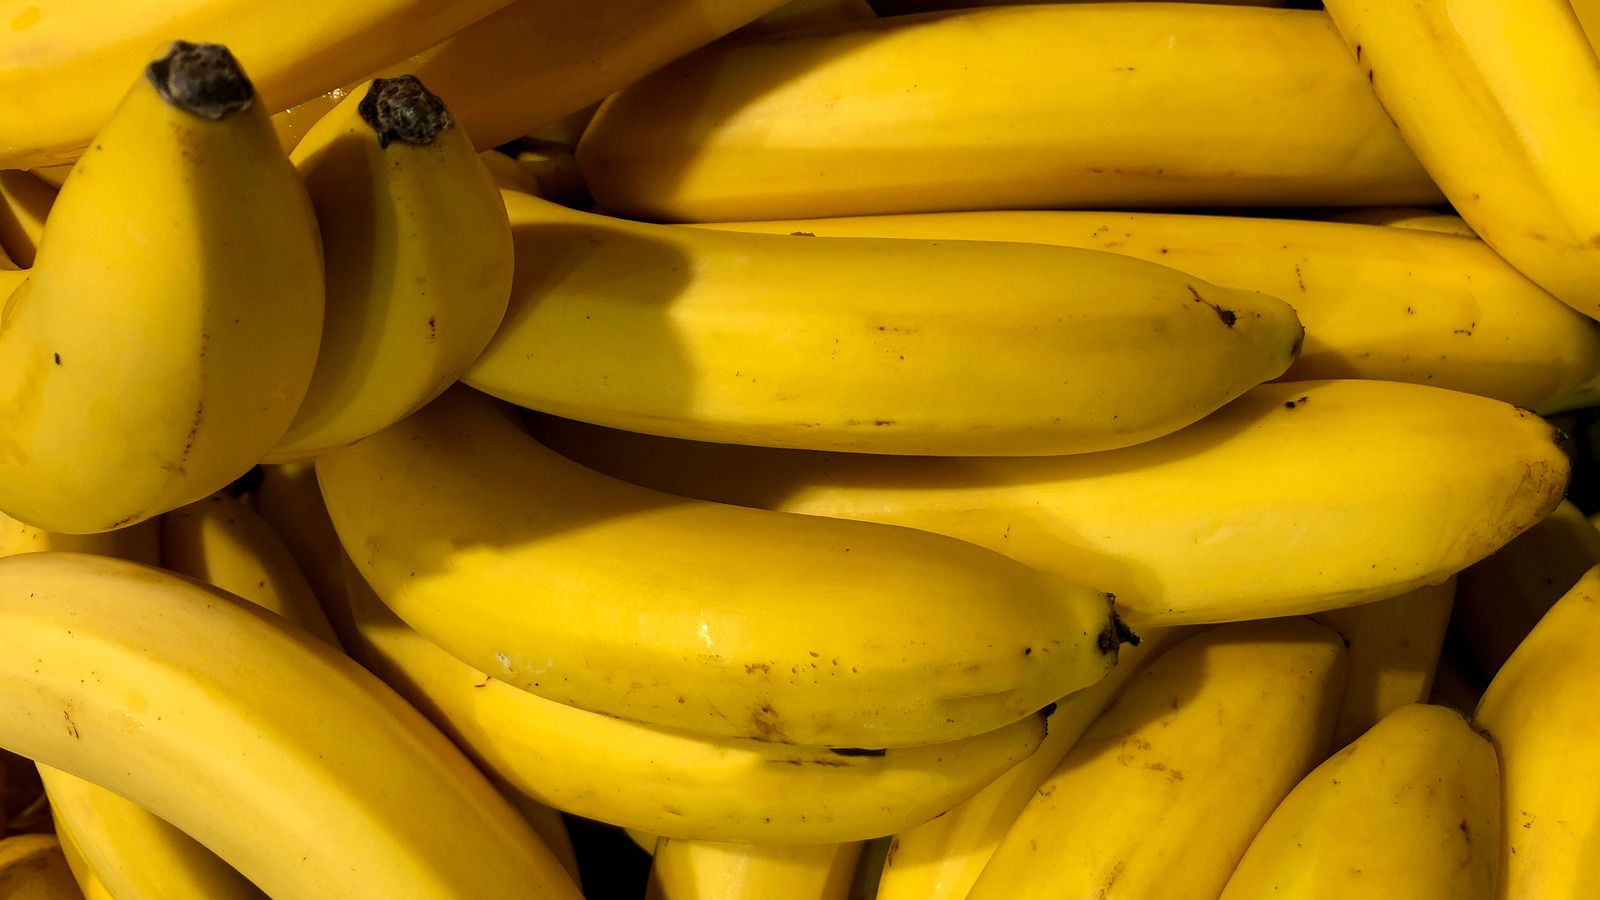 Bananas can help with cramps